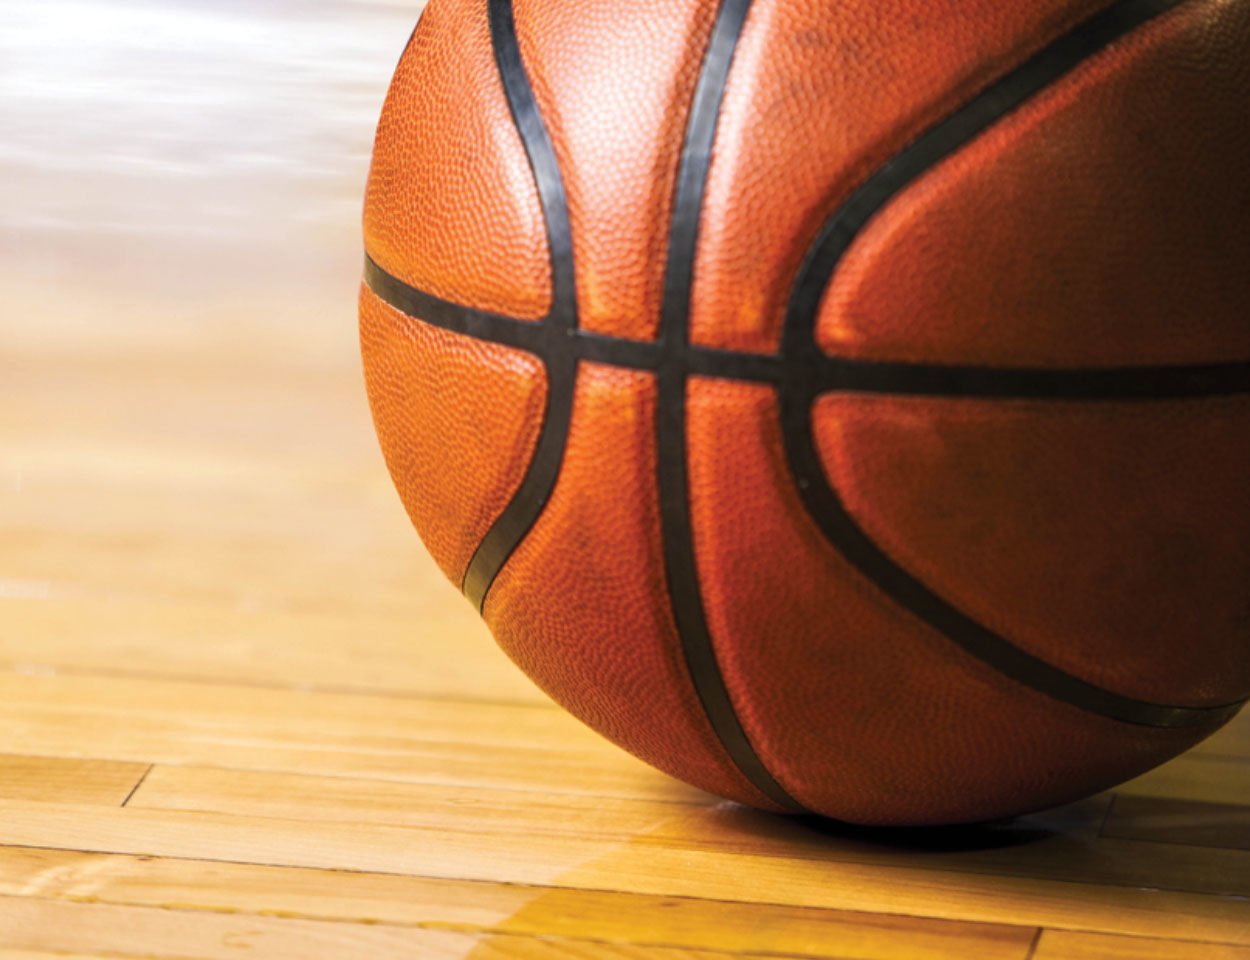 East Hardy, Southern, and Petersburg Secure Impressive Wins in High School Basketball